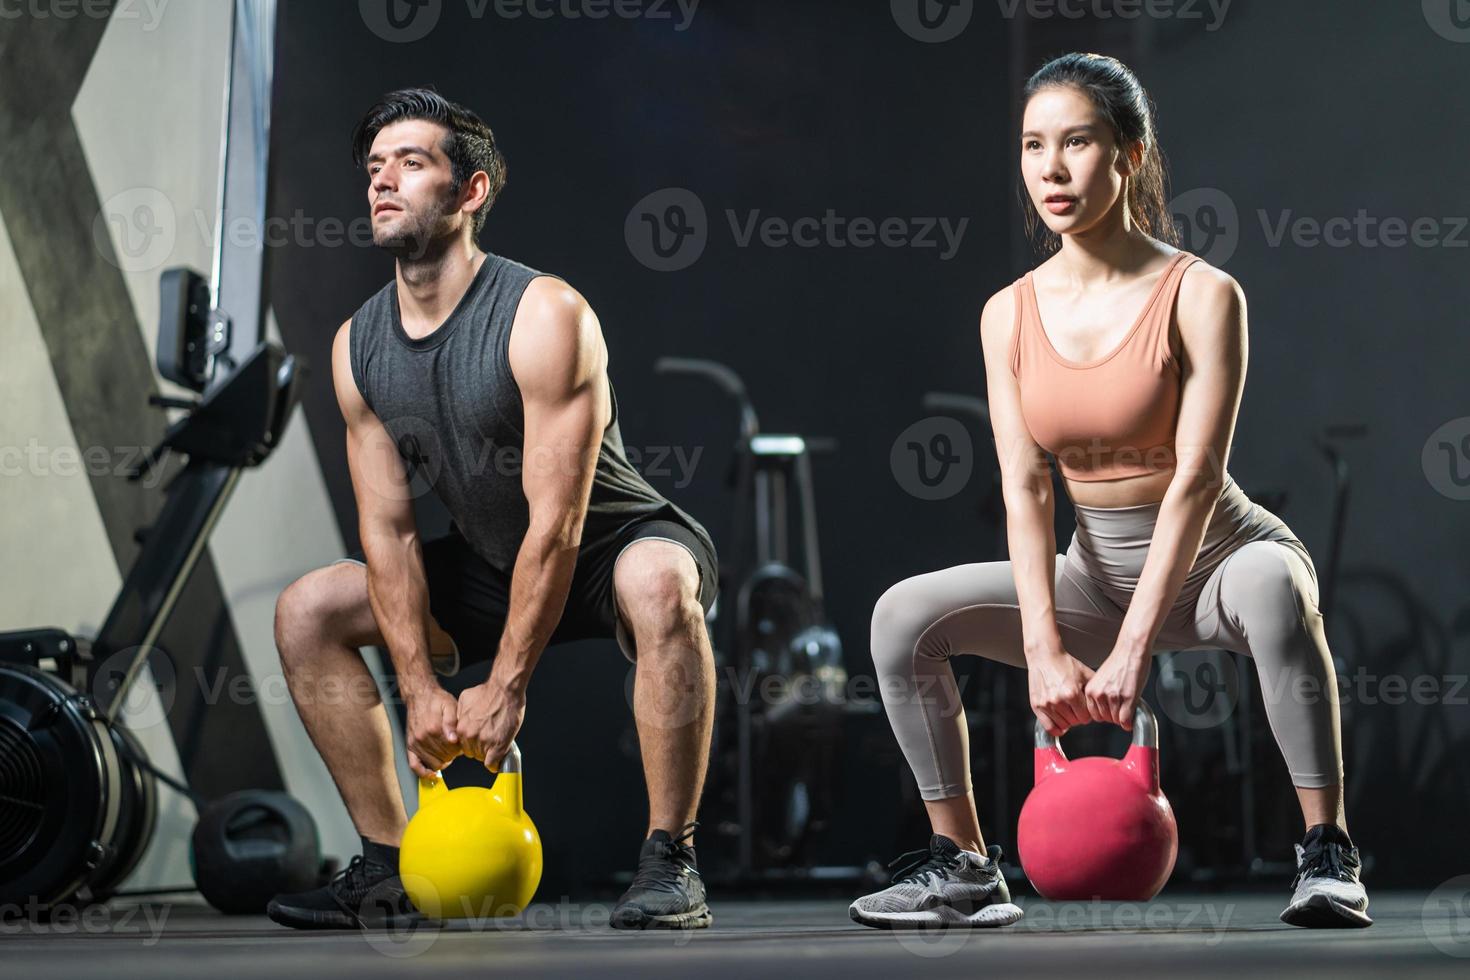 Selective focus at Asian women and men at the background. men swing kettlebell to do crossfit exercise and weight lifting inside fitness gym to workout for physical body strength and firm arms muscle photo